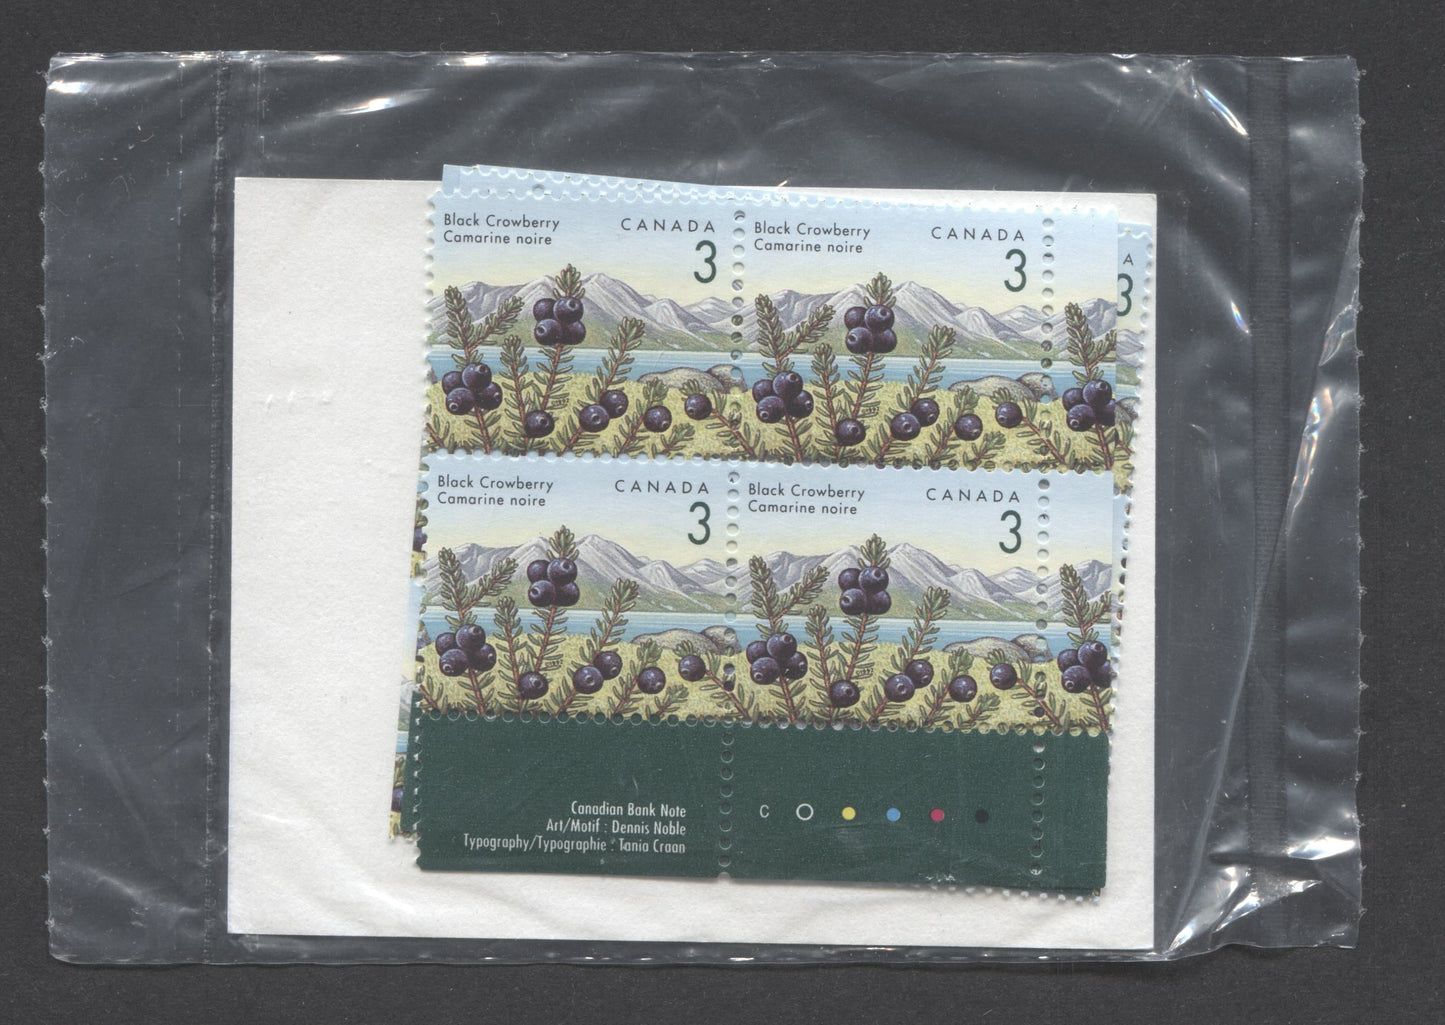 Lot 10 Canada #1351ii 3c Multicoloured 1992 - 1998 Edible Berries Definitive Issue, Canada Post Sealed Pack of Inscription Blocks, CBN Printing On DF CPP Paper, With HB Type 6B Insert Card, VFNH, Unitrade Cat. $13.75